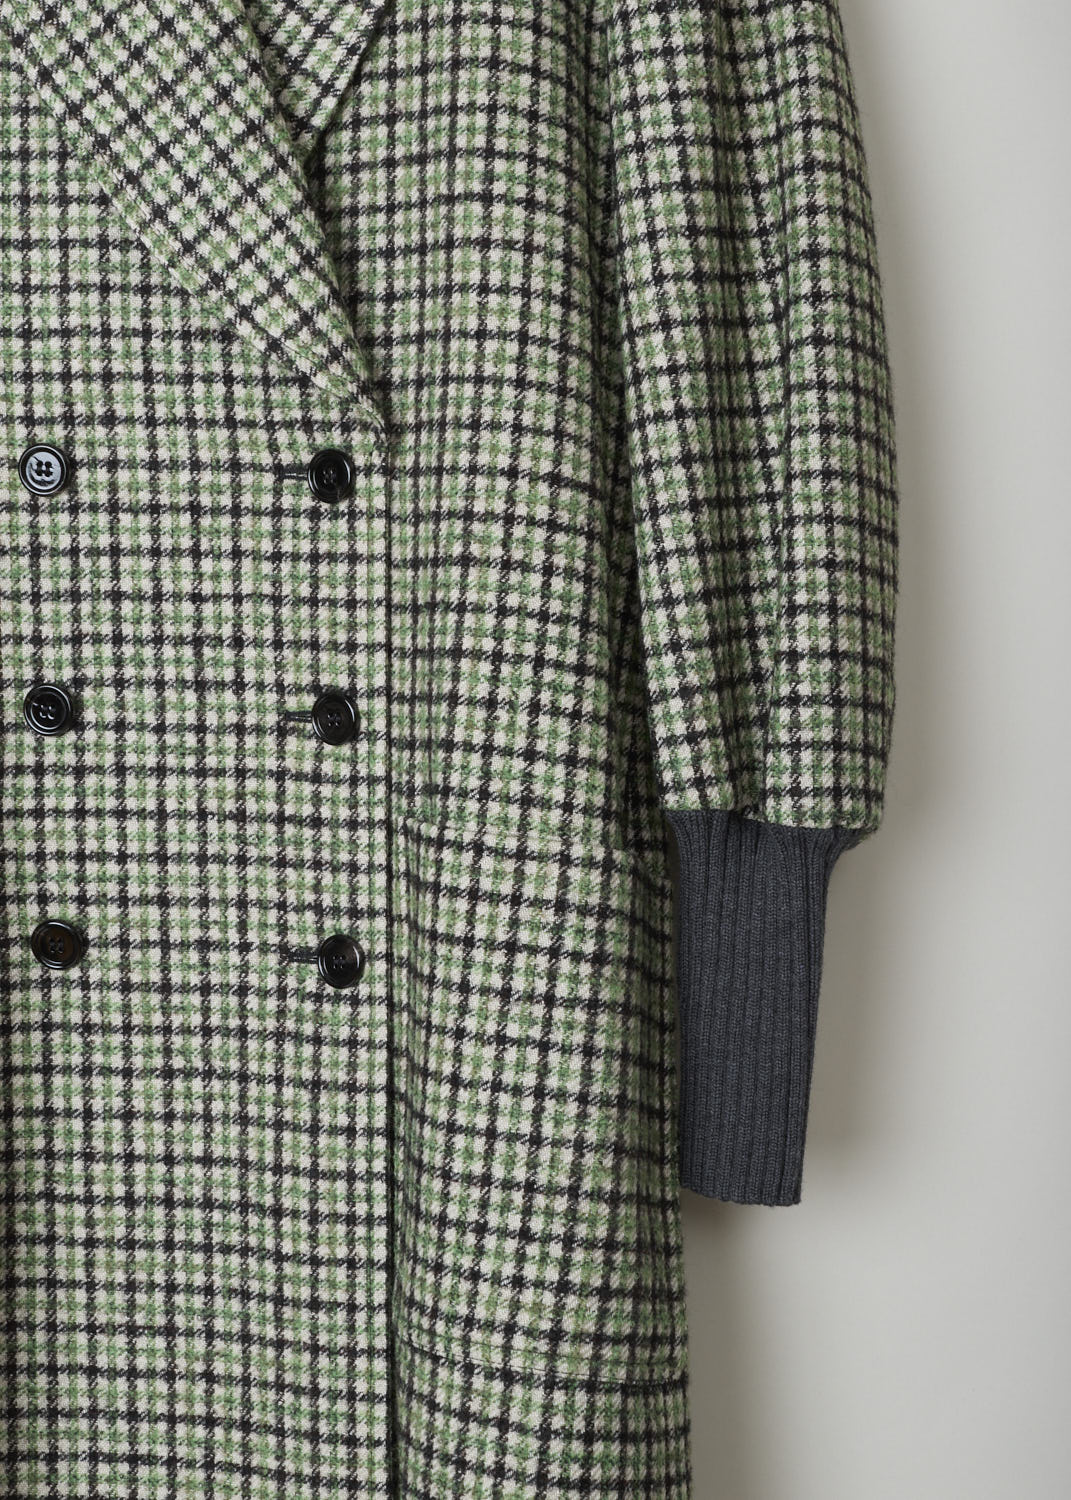 CHLOÃ‰, VIBRANT GREEN CHECK COAT, CHC21AMA1806439T40, Green, Print, Detail, This beautiful vibrant green check coat is soft to the touch. This double breasted coat has a peaked lapel. Across the front, two rows with buttons can be found. Also on the front are two patch pockets. Standing out are the exaggerated knitted cuffs. 